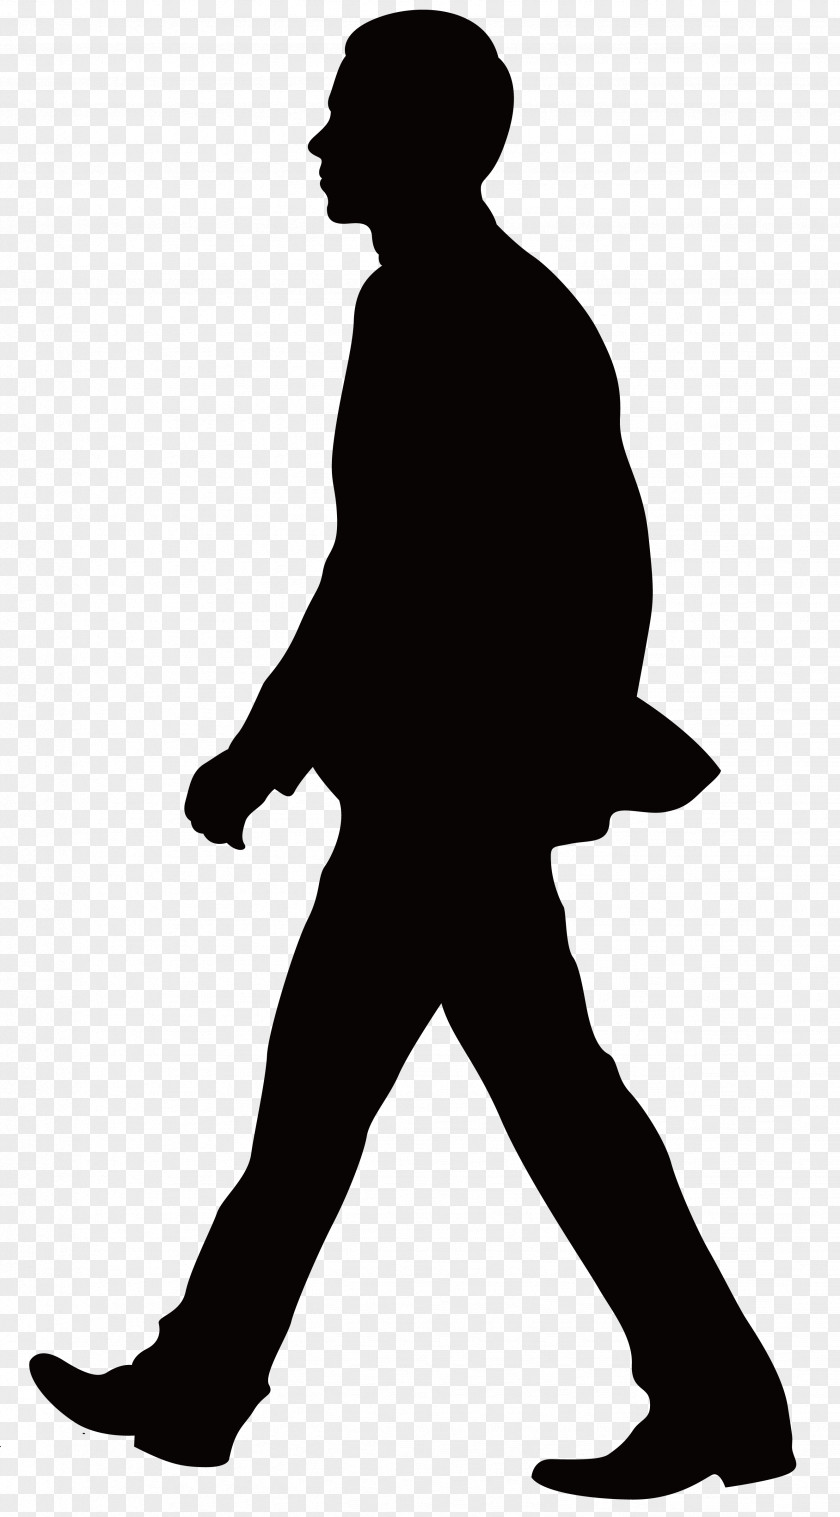 Man Silhouette Download PNG